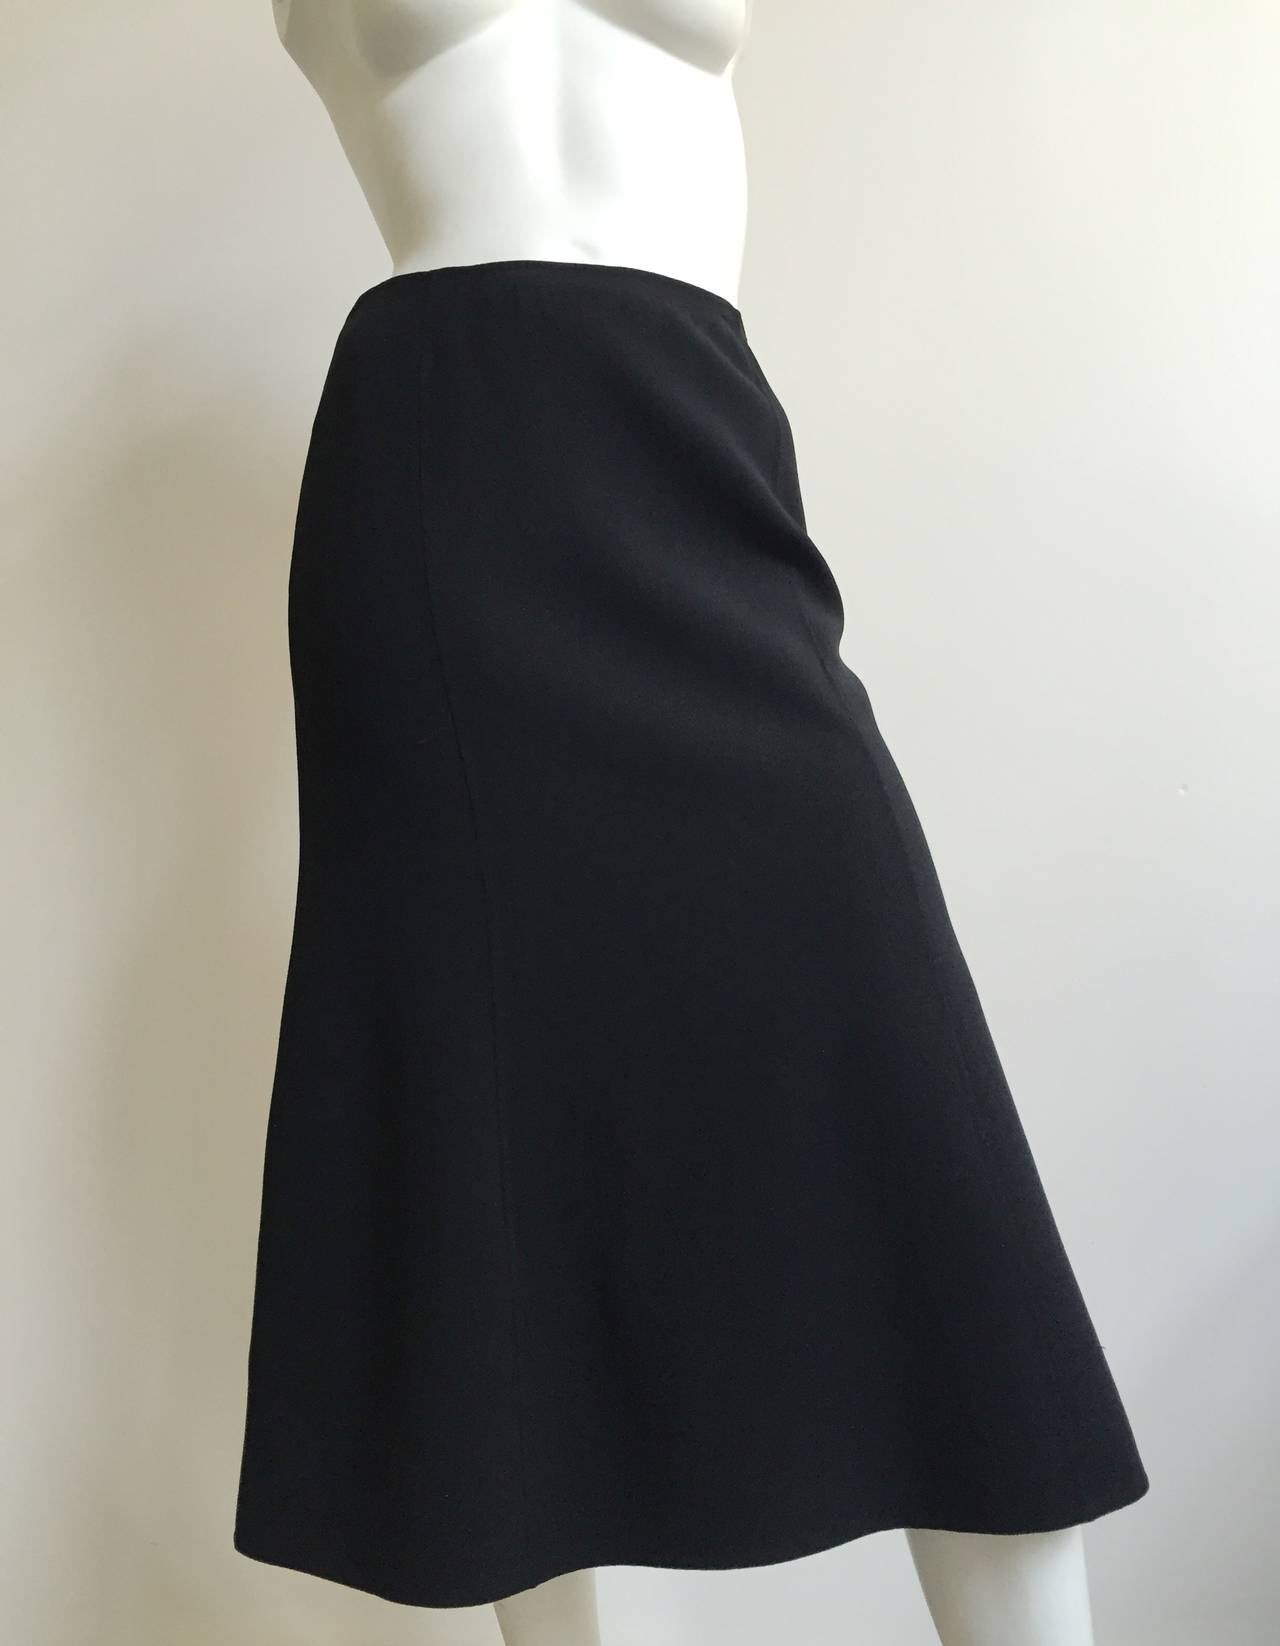 Celine black wool skirt hand finished for that quality touch is a French size 38 but fits like a 4/6 ( Please see & use measurements so that you can properly measure your body). High waisted skirt.
Measurements are:
27.5